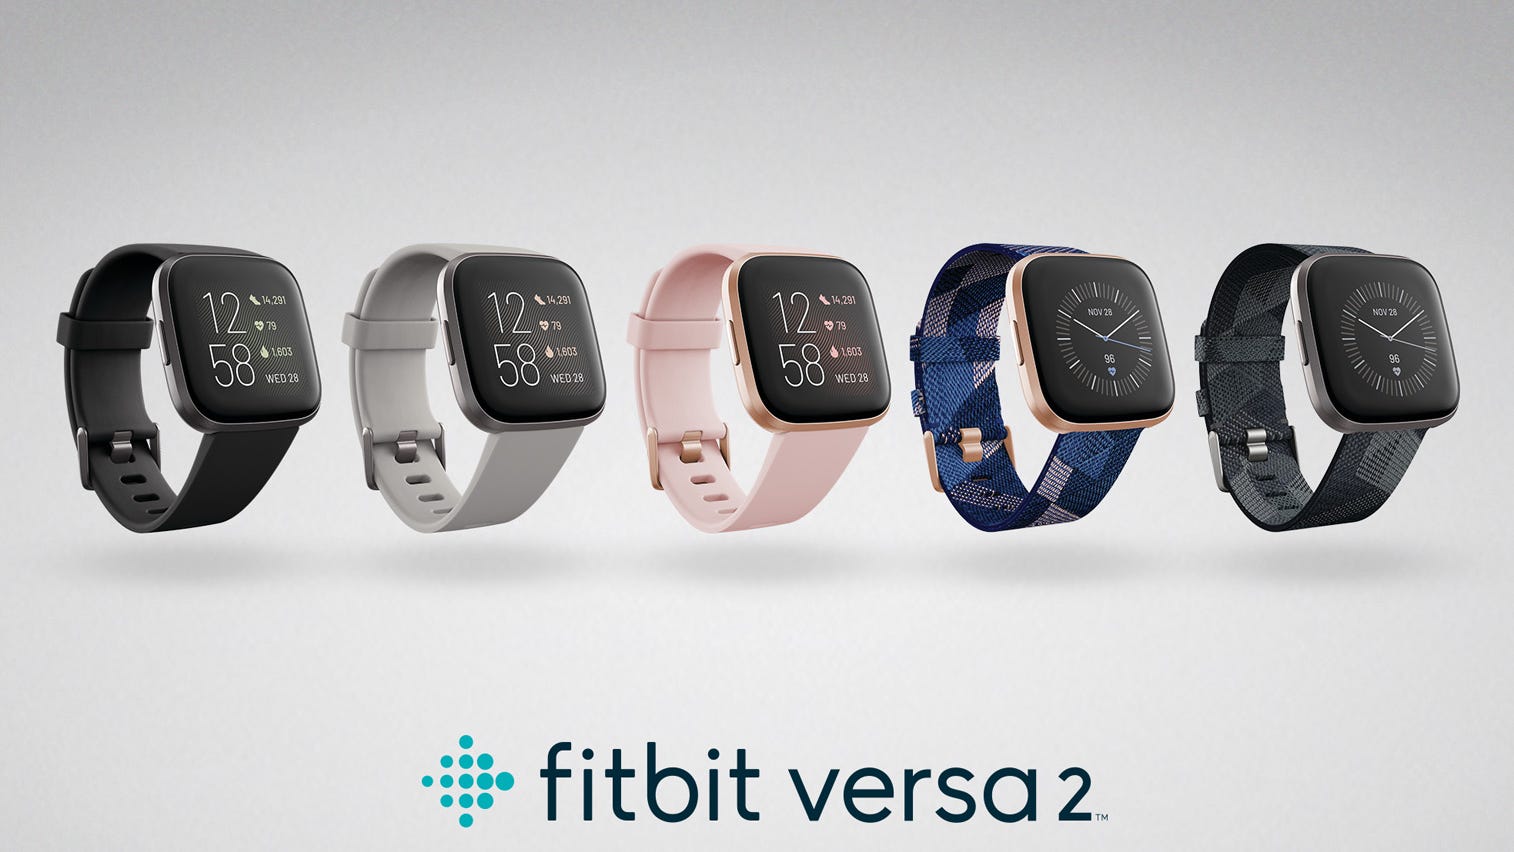 Luske Næste Forstyrrelse Fitbit Versa 2: Battery life, screen and Sleep Scare best features